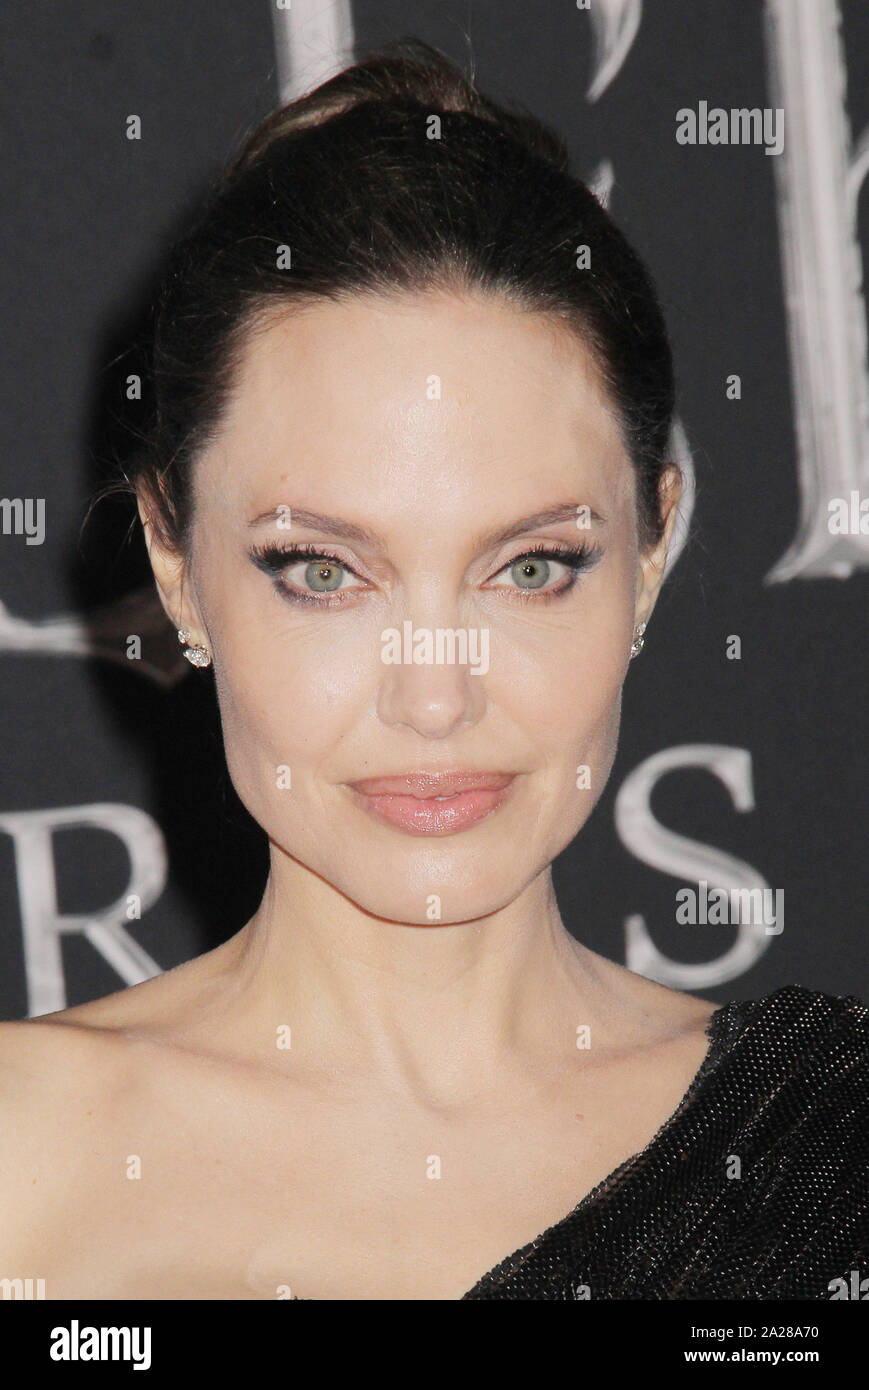 Los Angeles, USA. 30th Sep, 2019. Angelina Jolie 09/30/2019 The World  Premiere of "Maleficent: